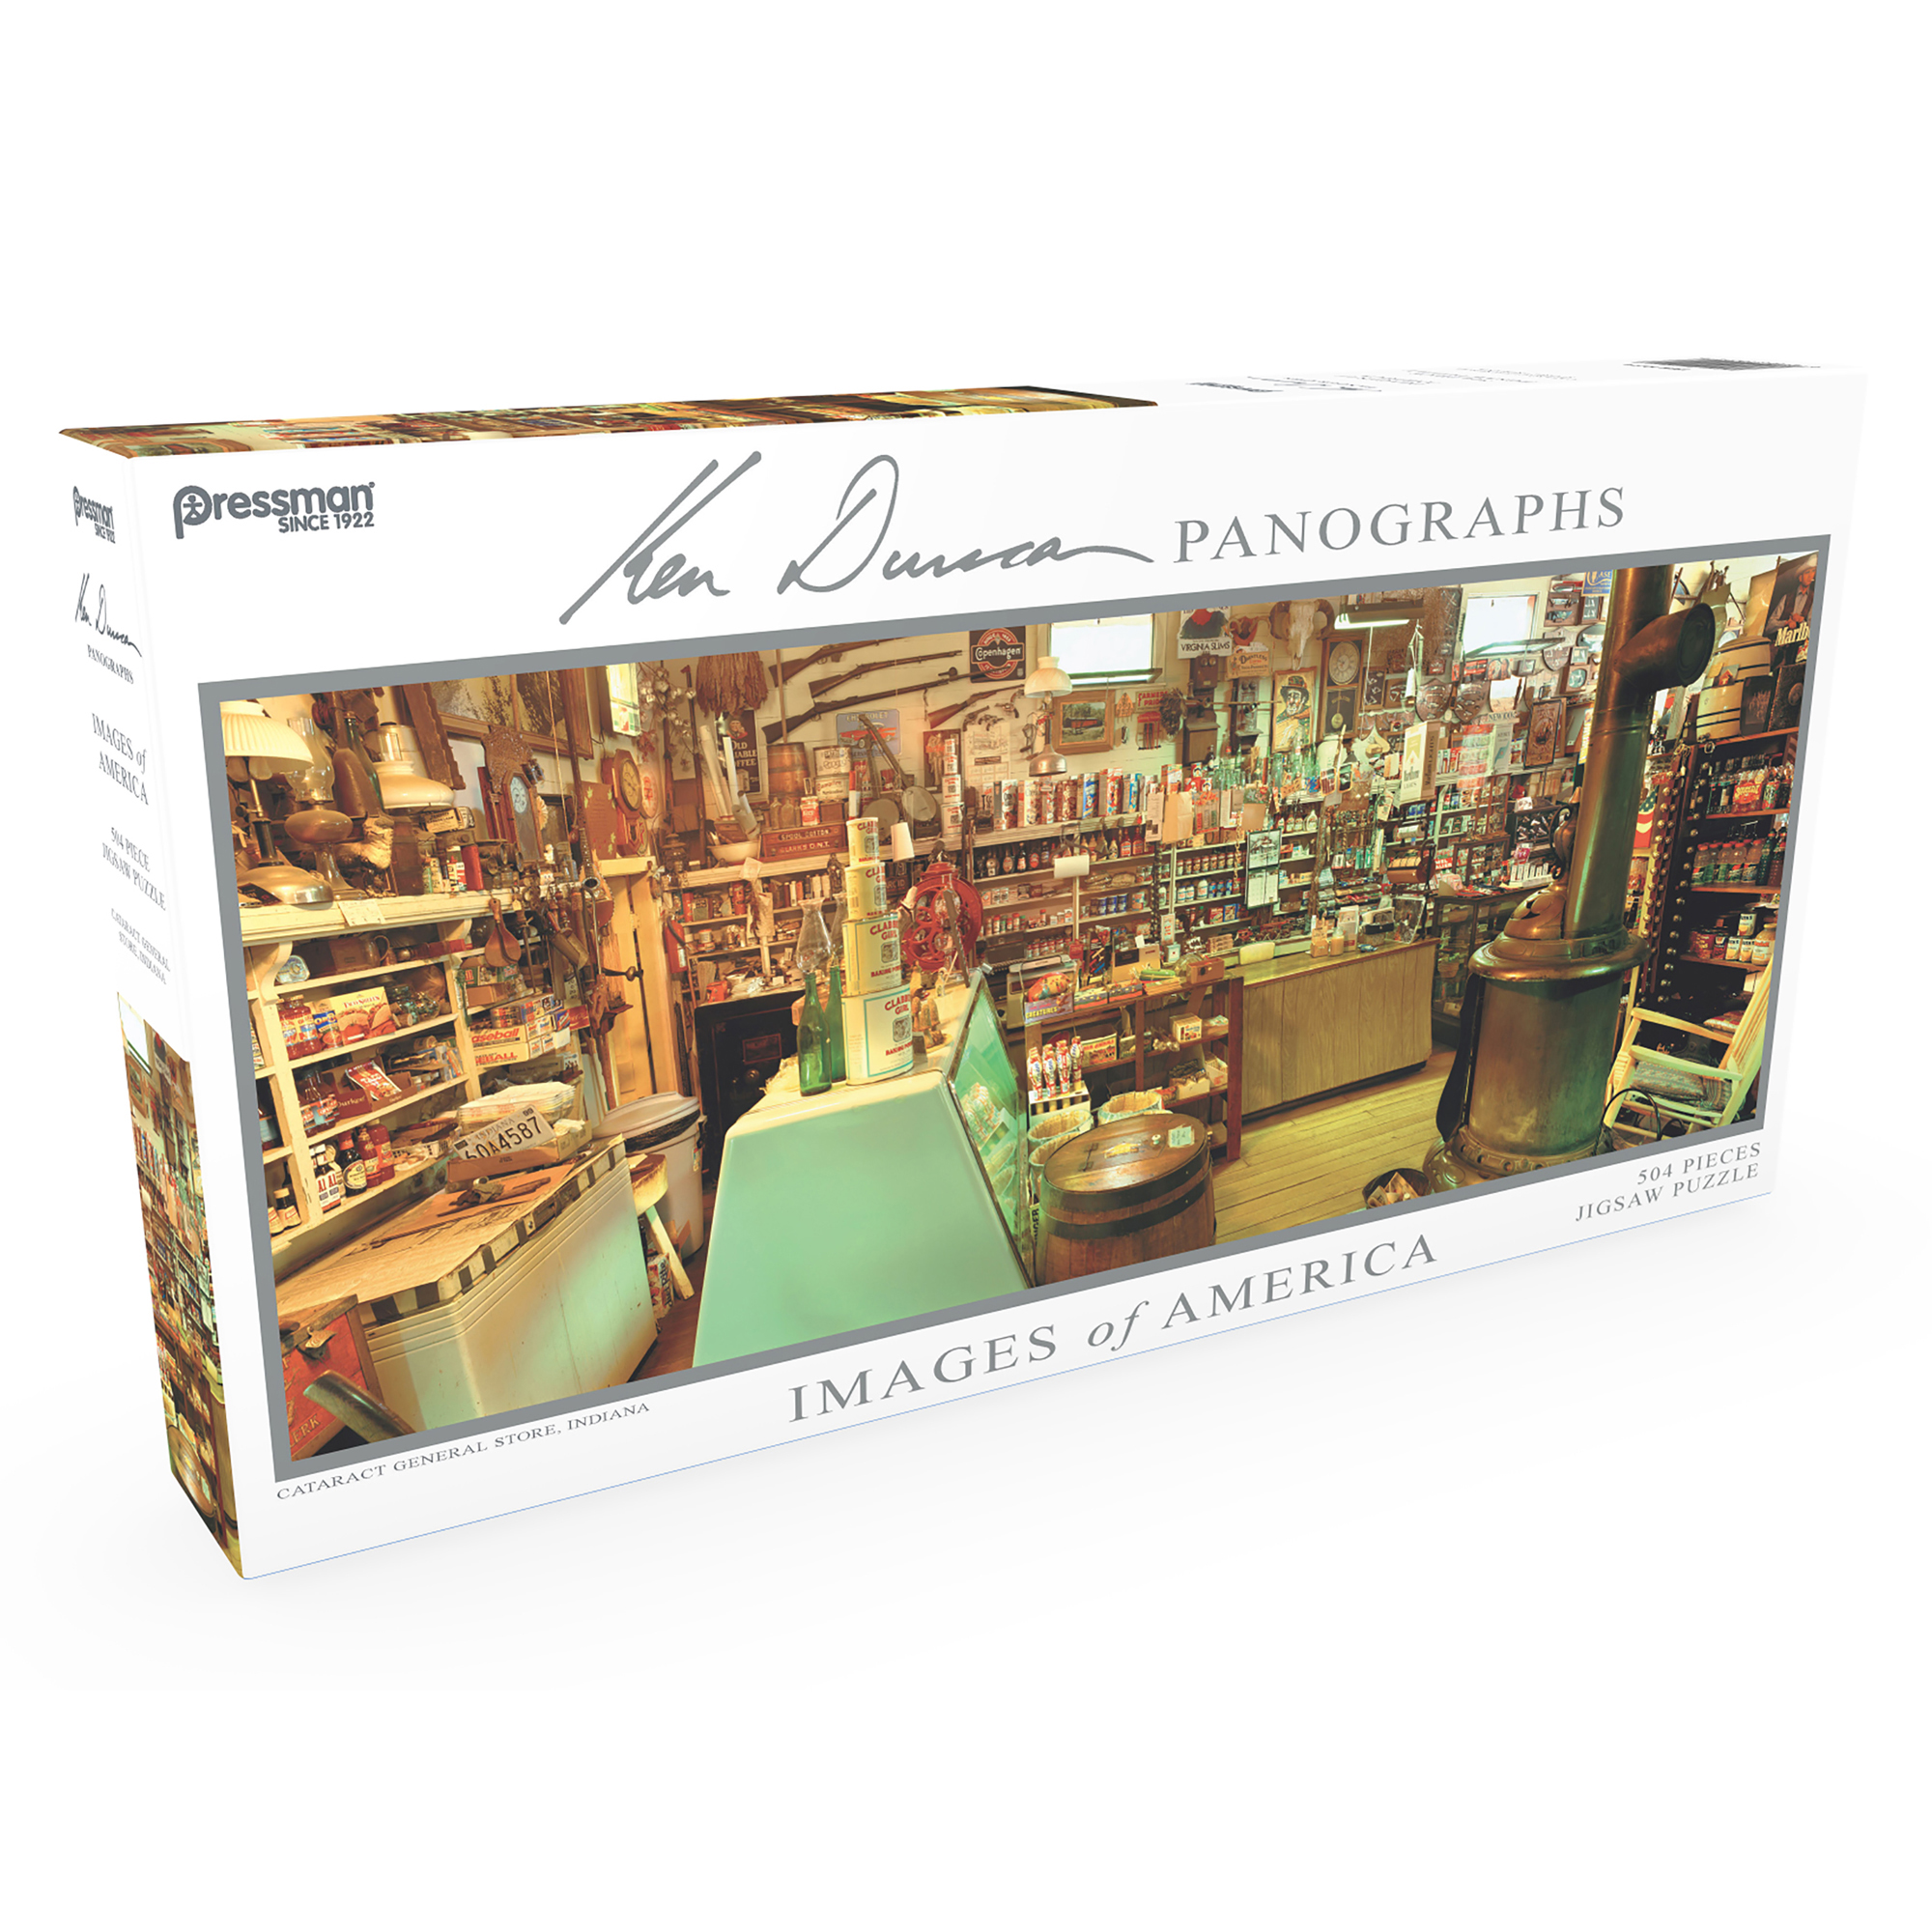 Pressman Toy Images of America 504 Piece Panoramic Puzzle, Cataract General Store